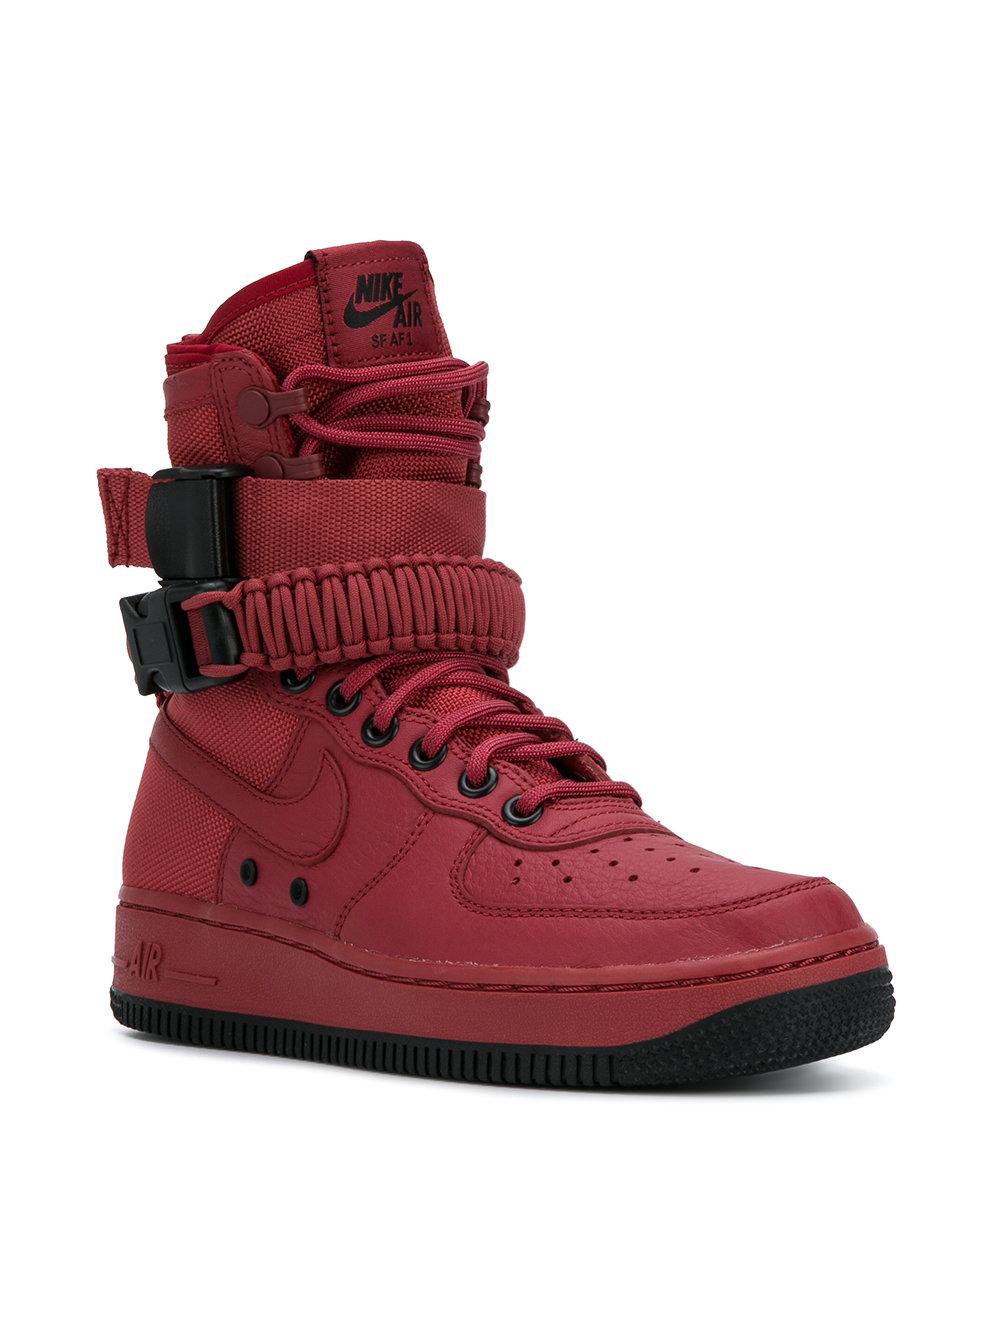 Nike Leather Sf Air Force 1 High Top Sneaker in Red - Lyst